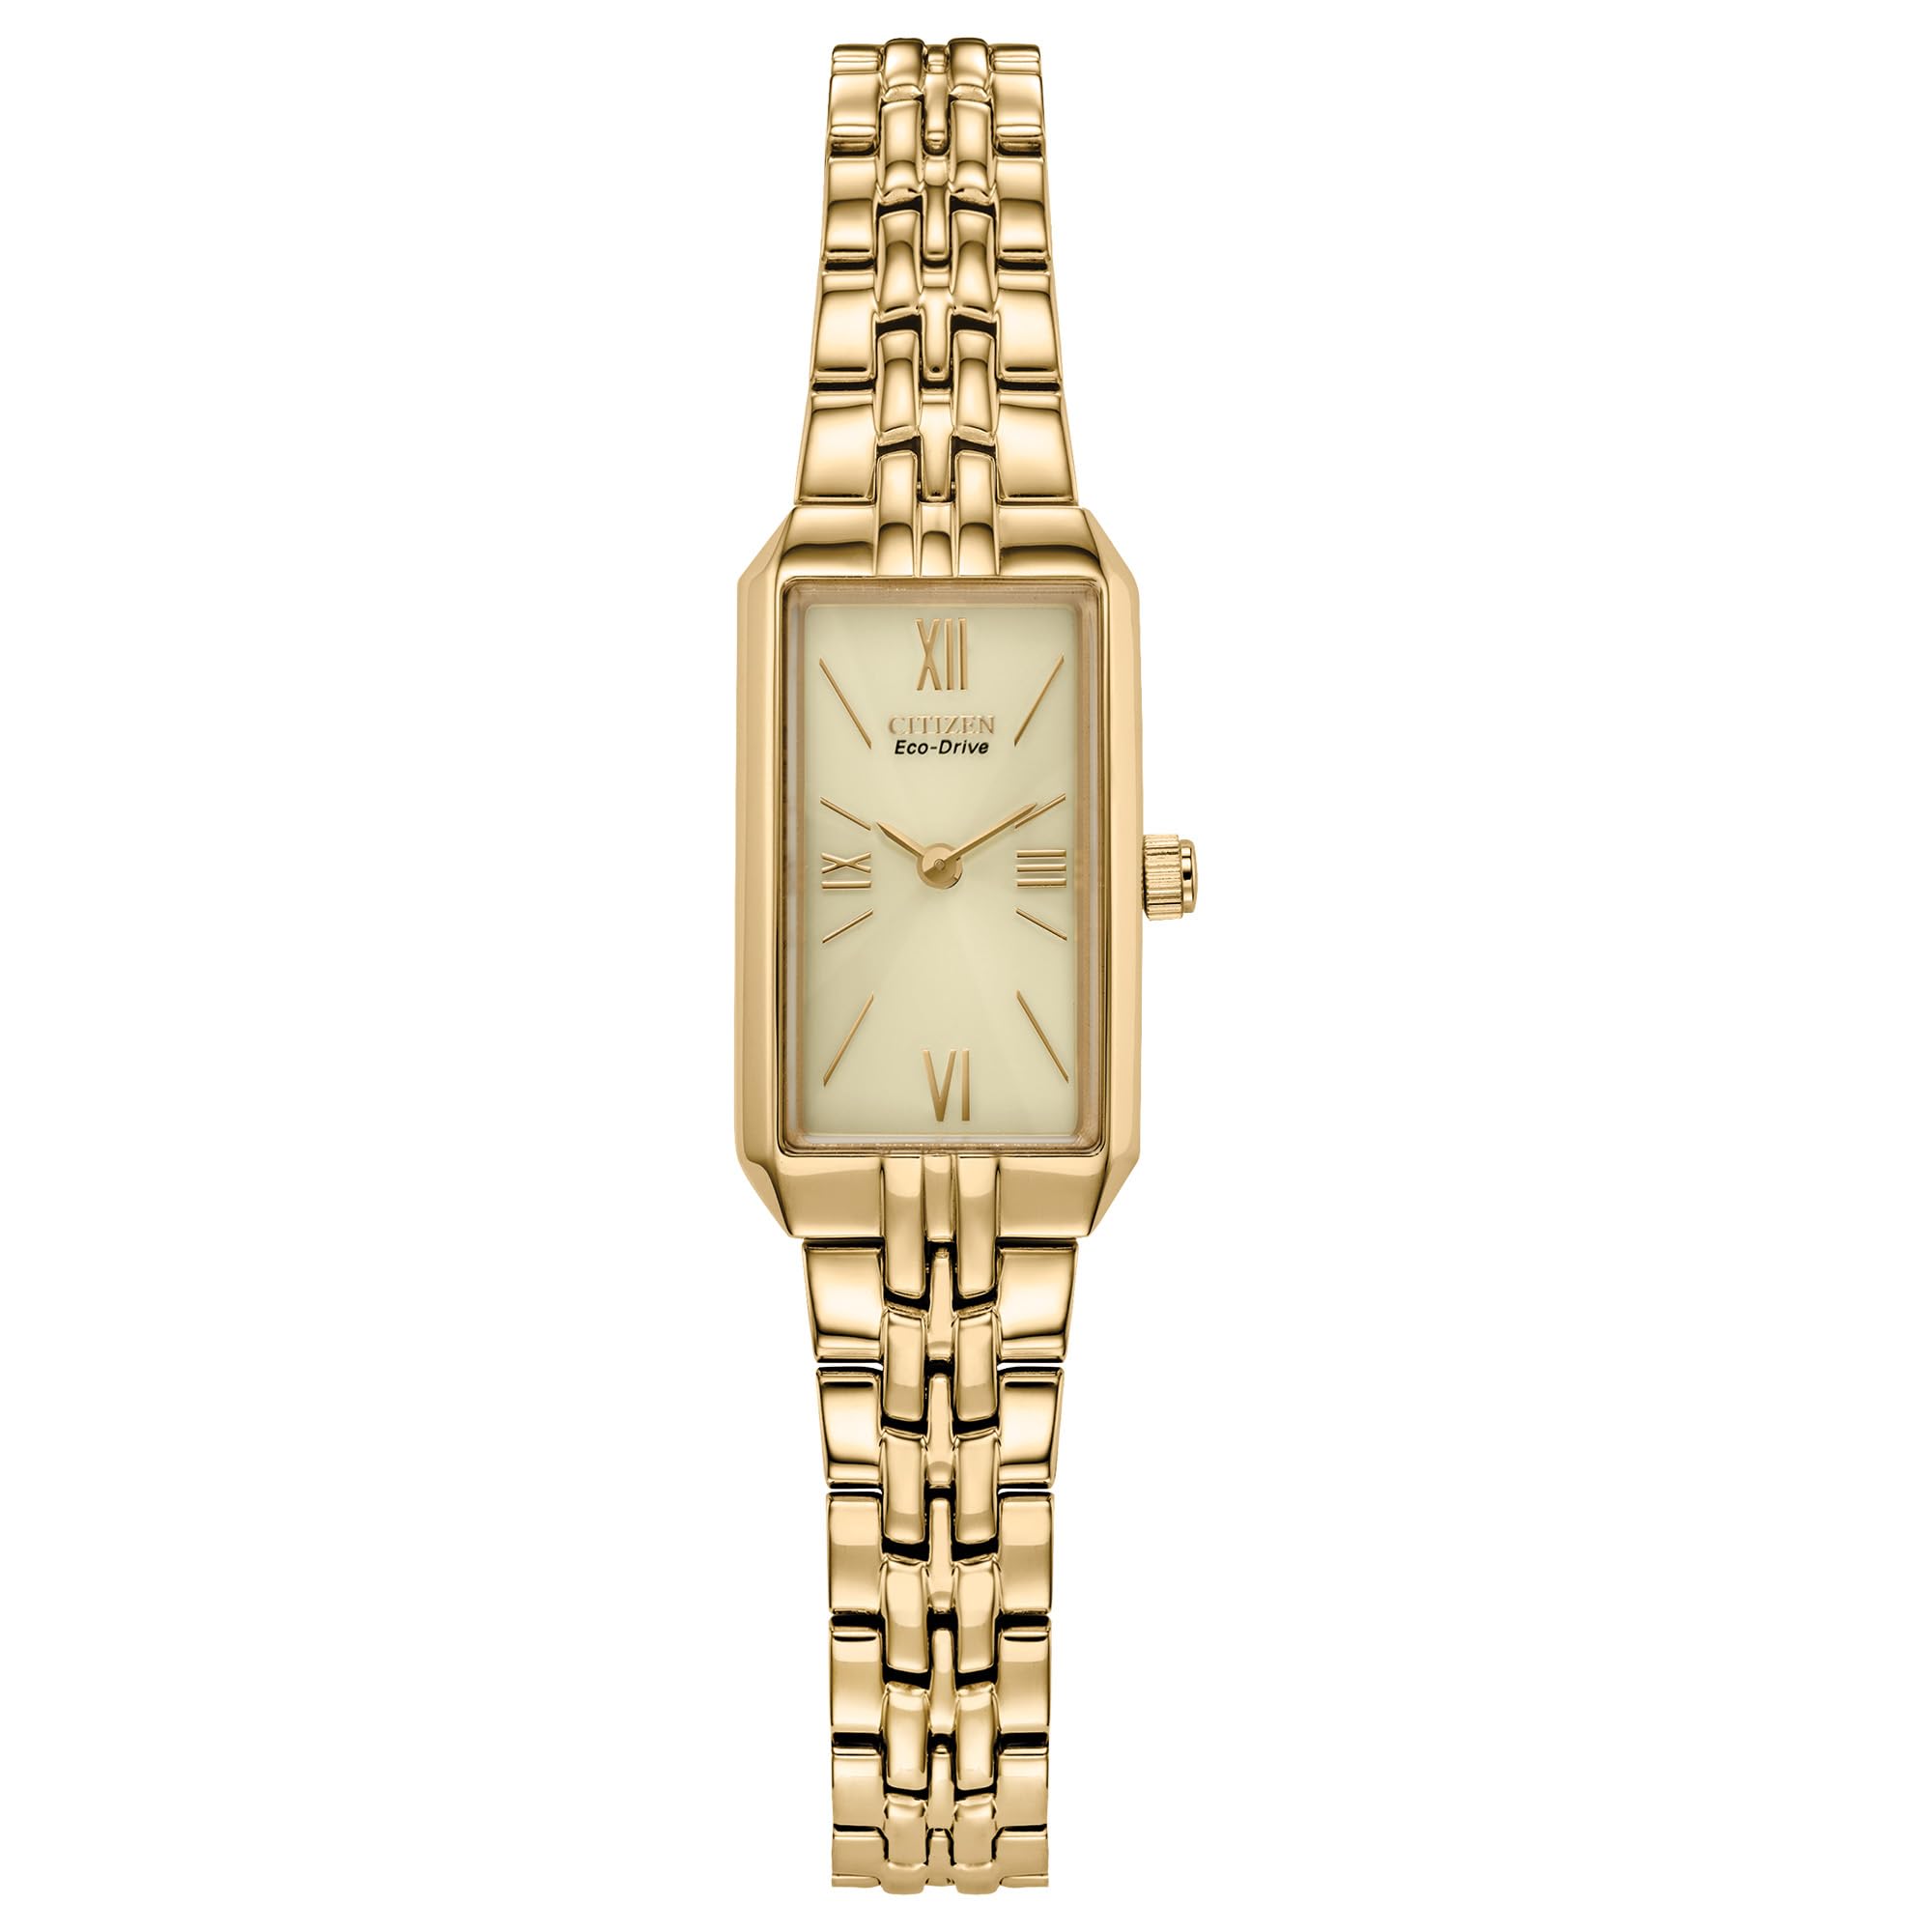 Citizen Ladies Eco-Drive Classic Dress Corso Gold Tone Stainless Steel Rectangle Watch with Champagne Dial 2-Hand Jewelry